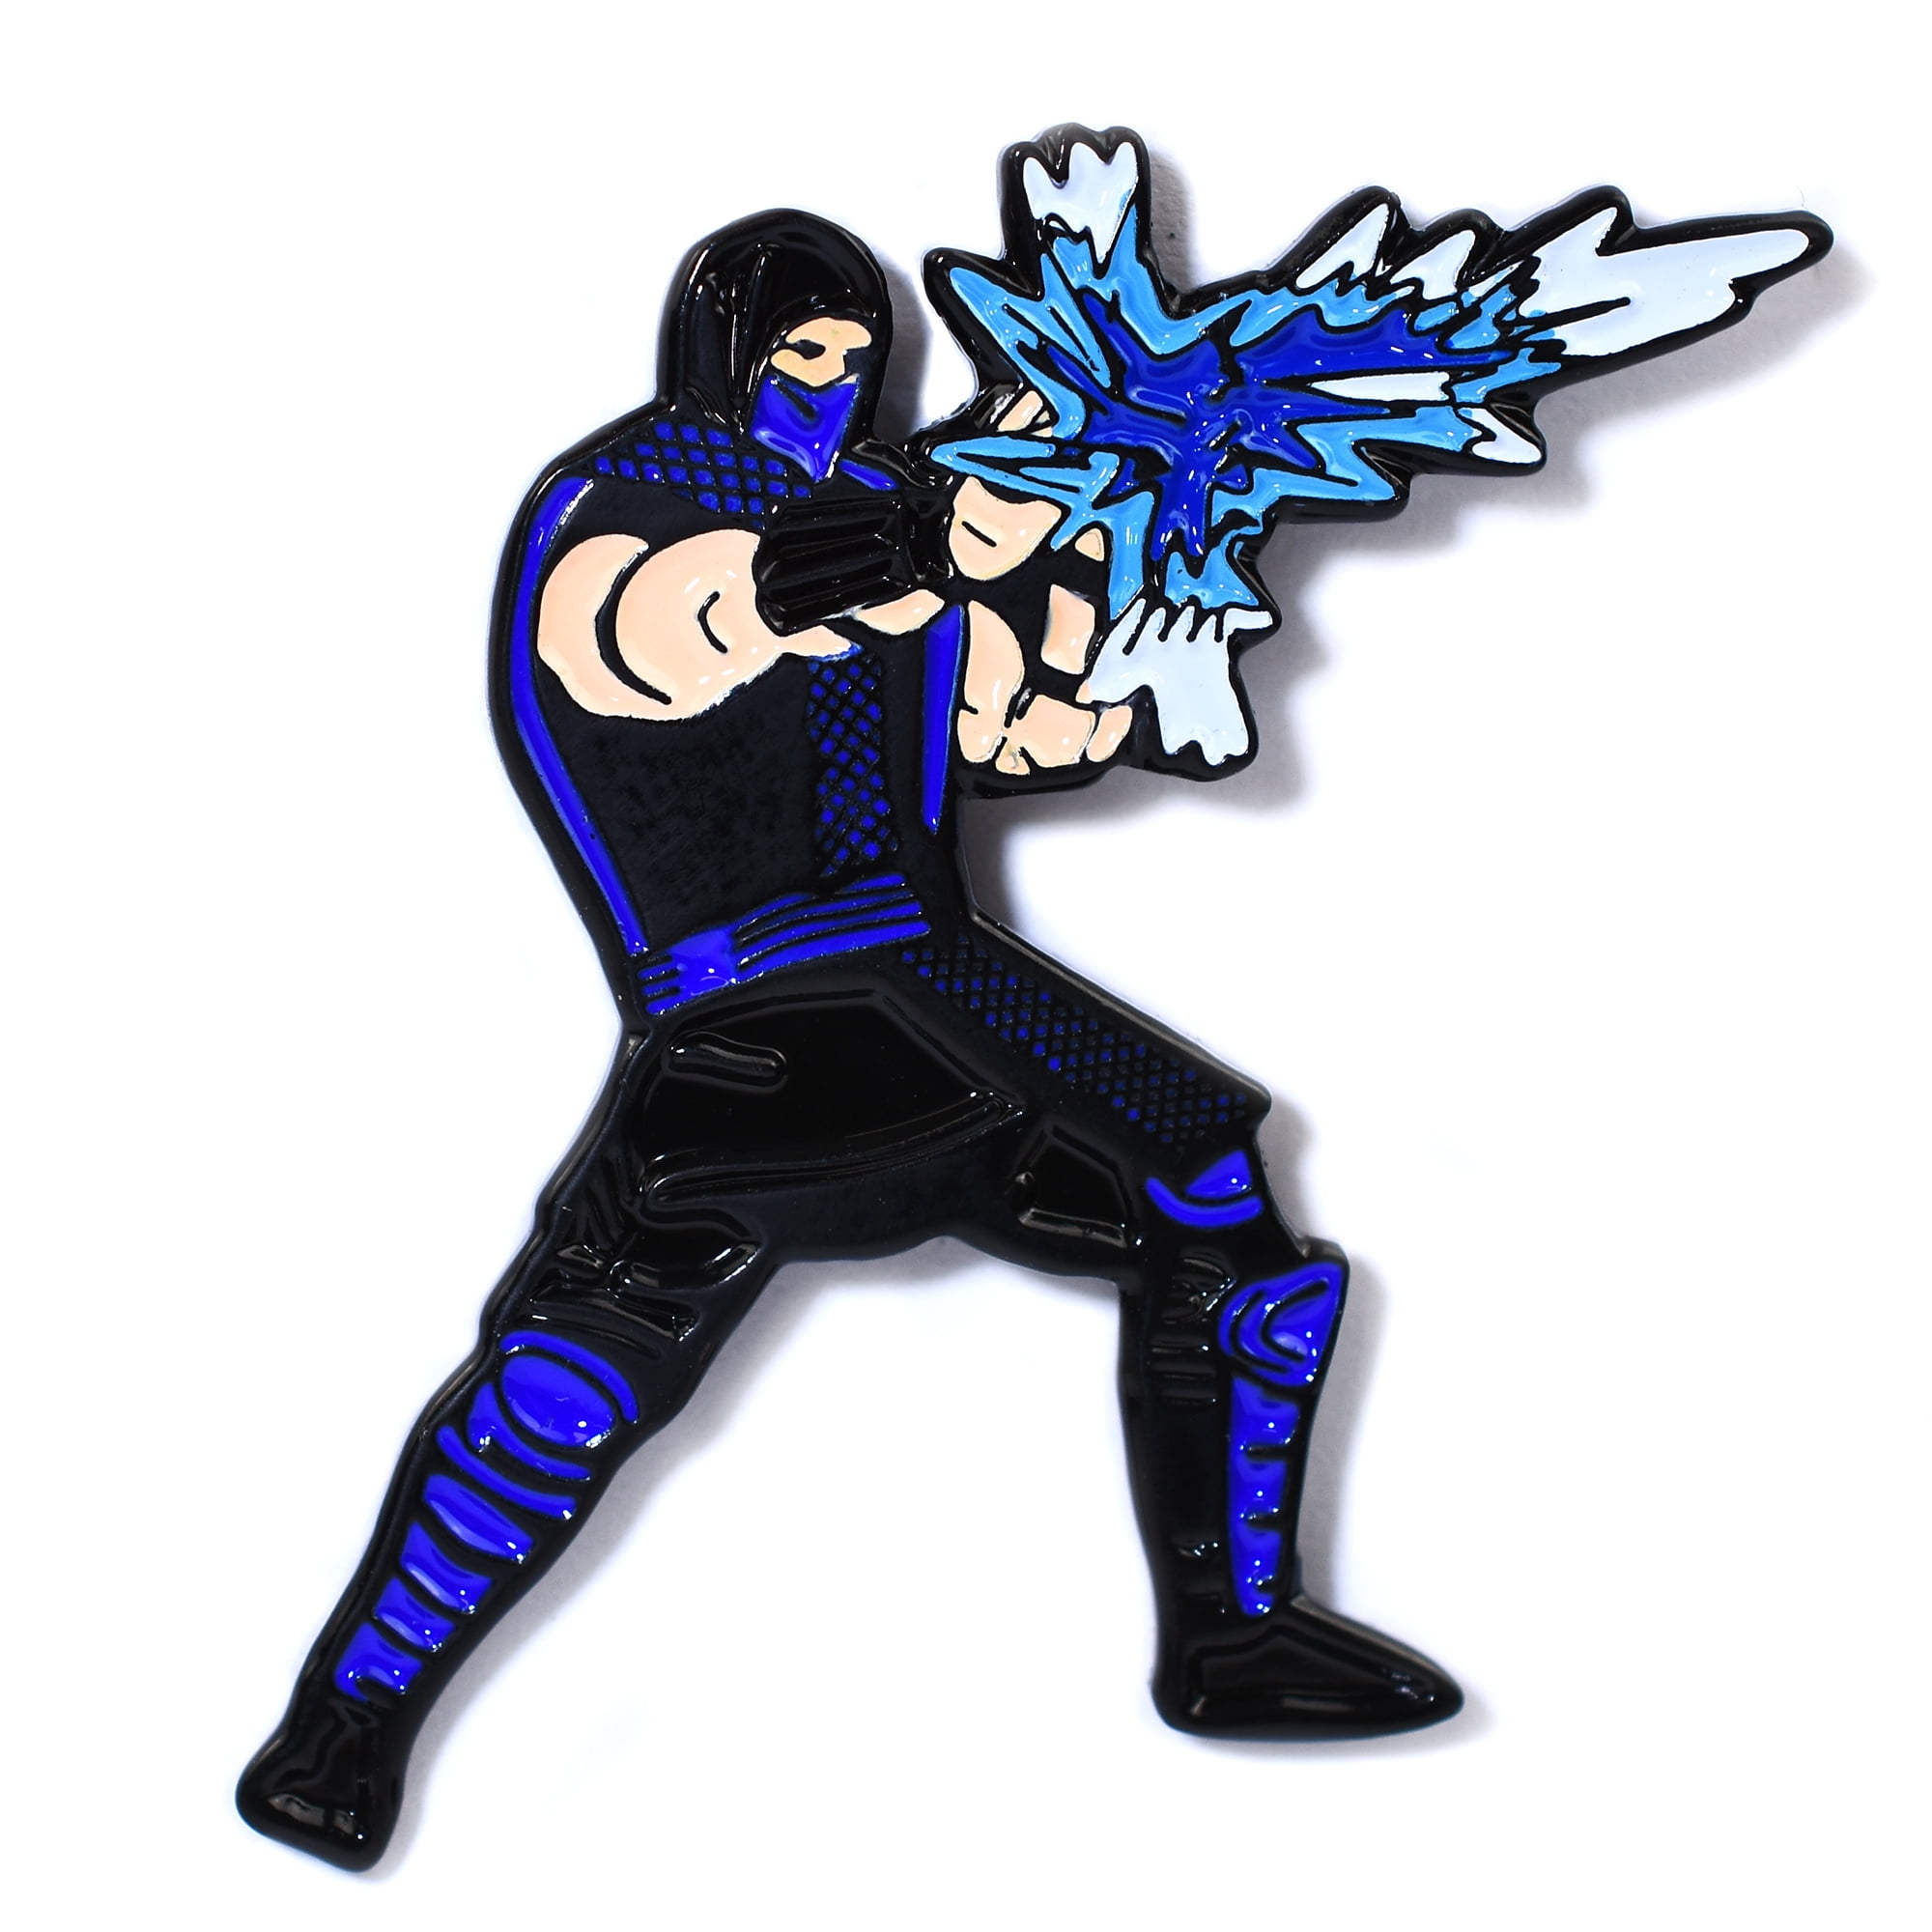 Flawless Victory Mortal Kombat Pins and Buttons | Redbubble